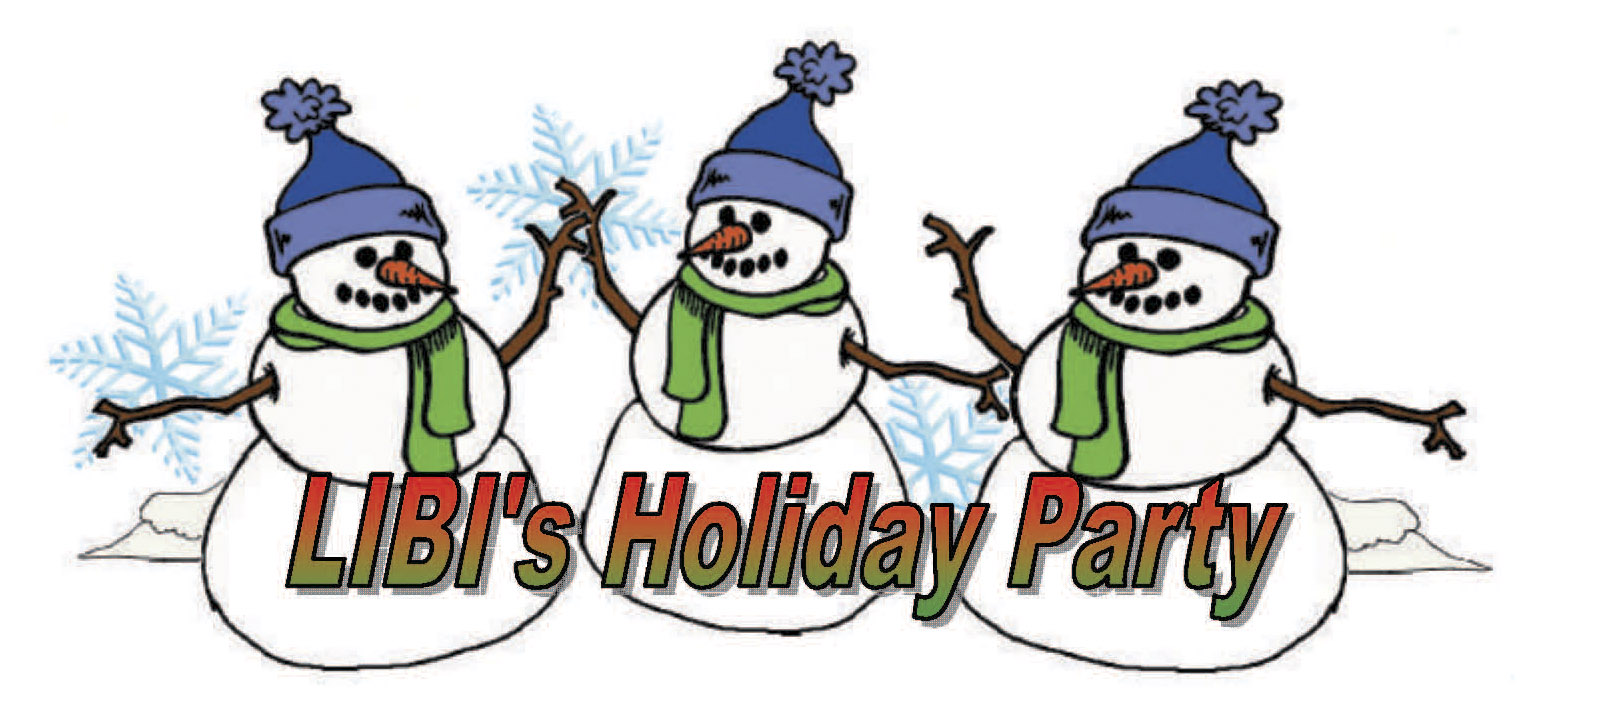 free christmas party clipart images - photo #26